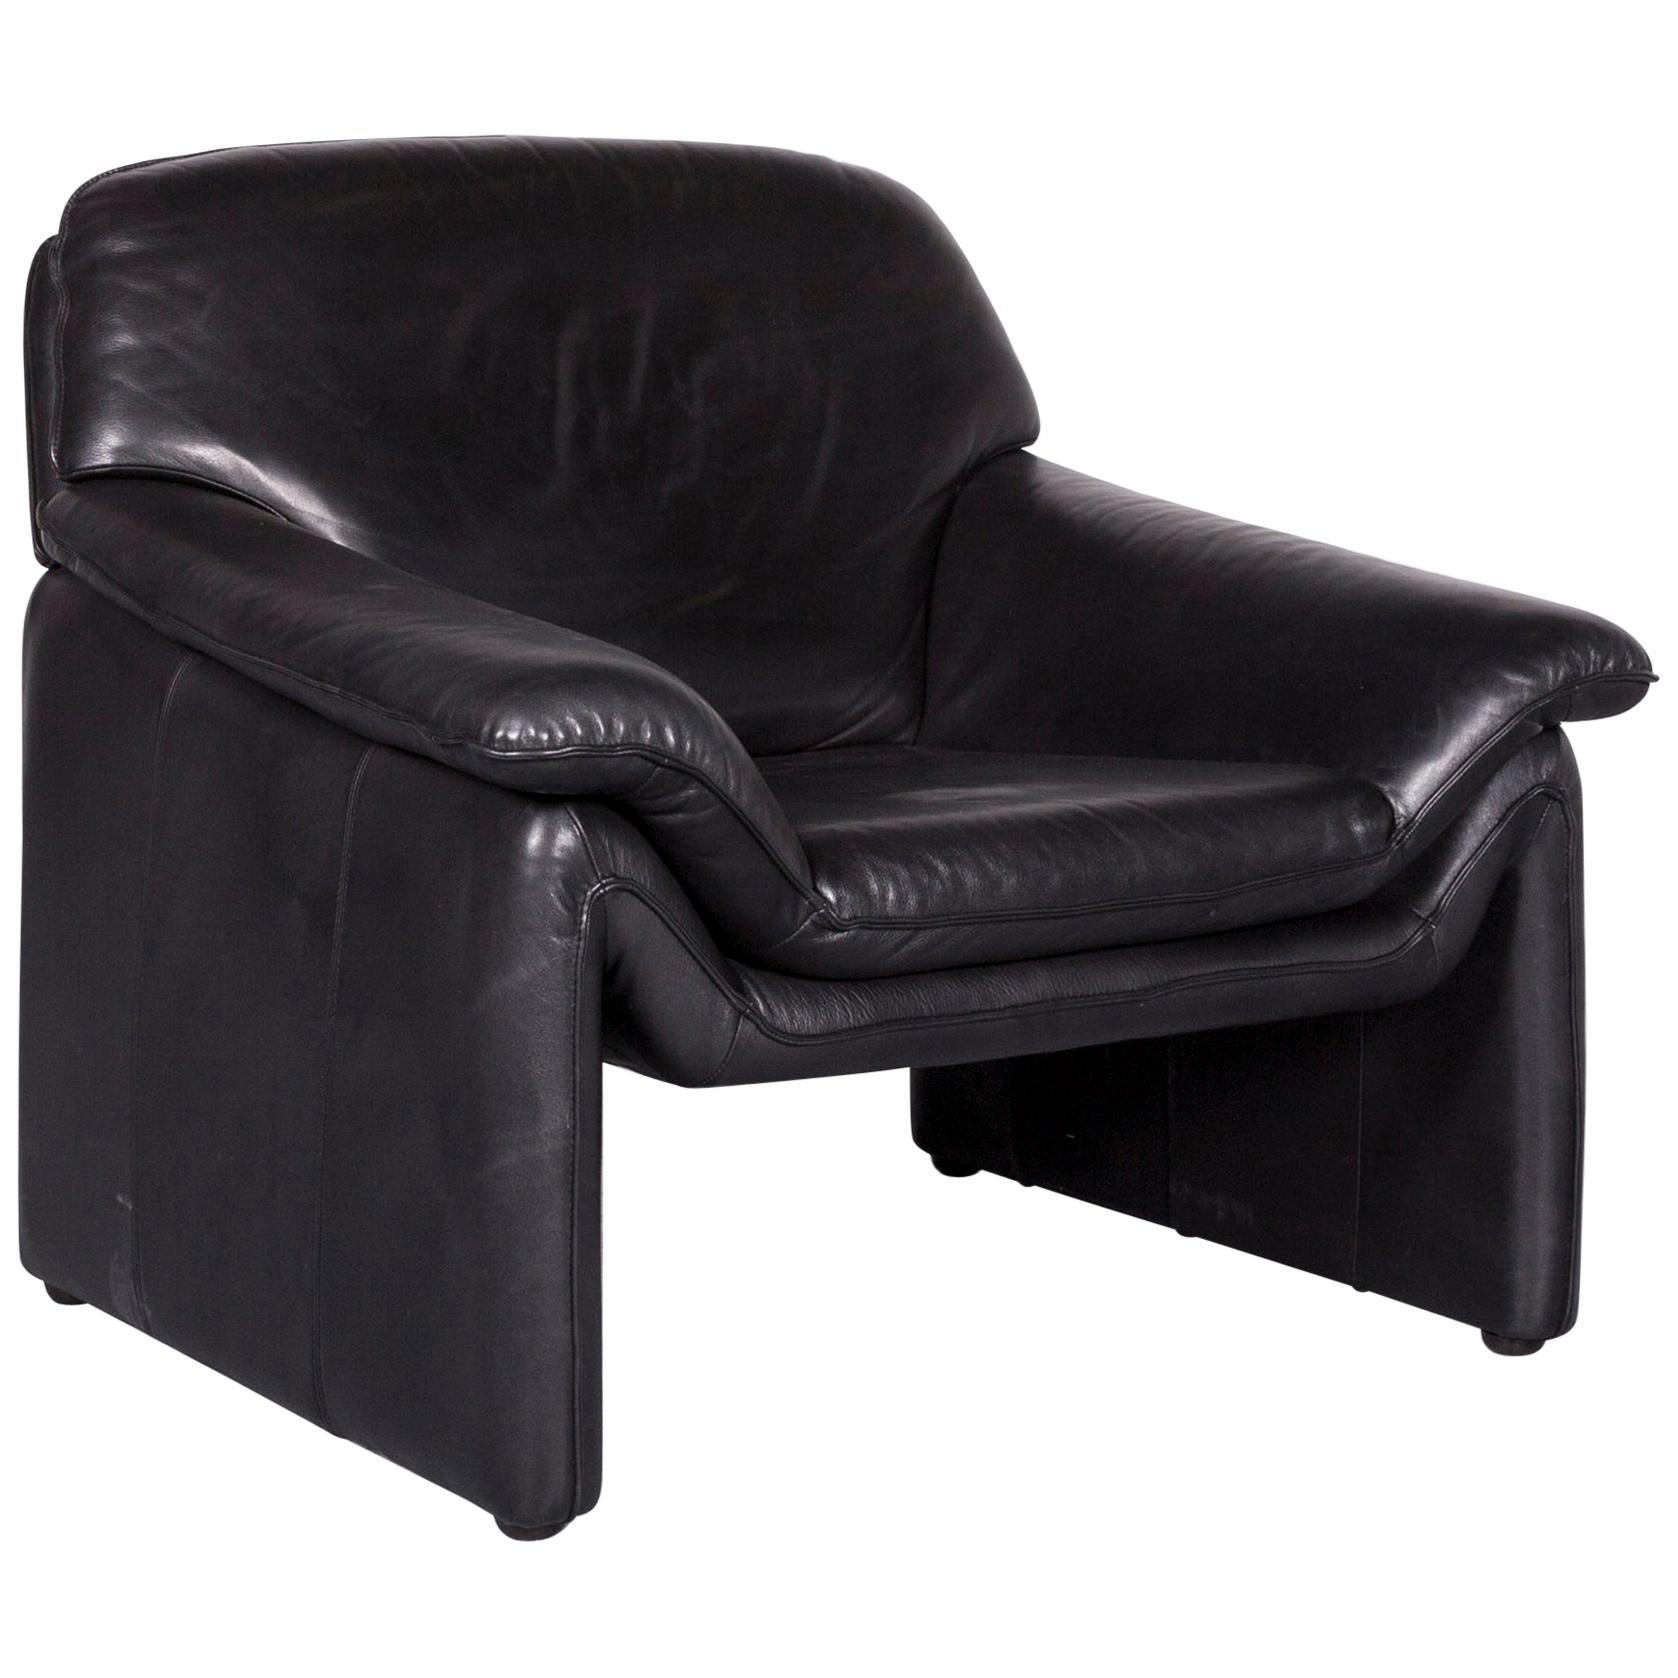 Laauser Atlanta Designer Armchair Leather Black One-Seat Couch Modern For Sale